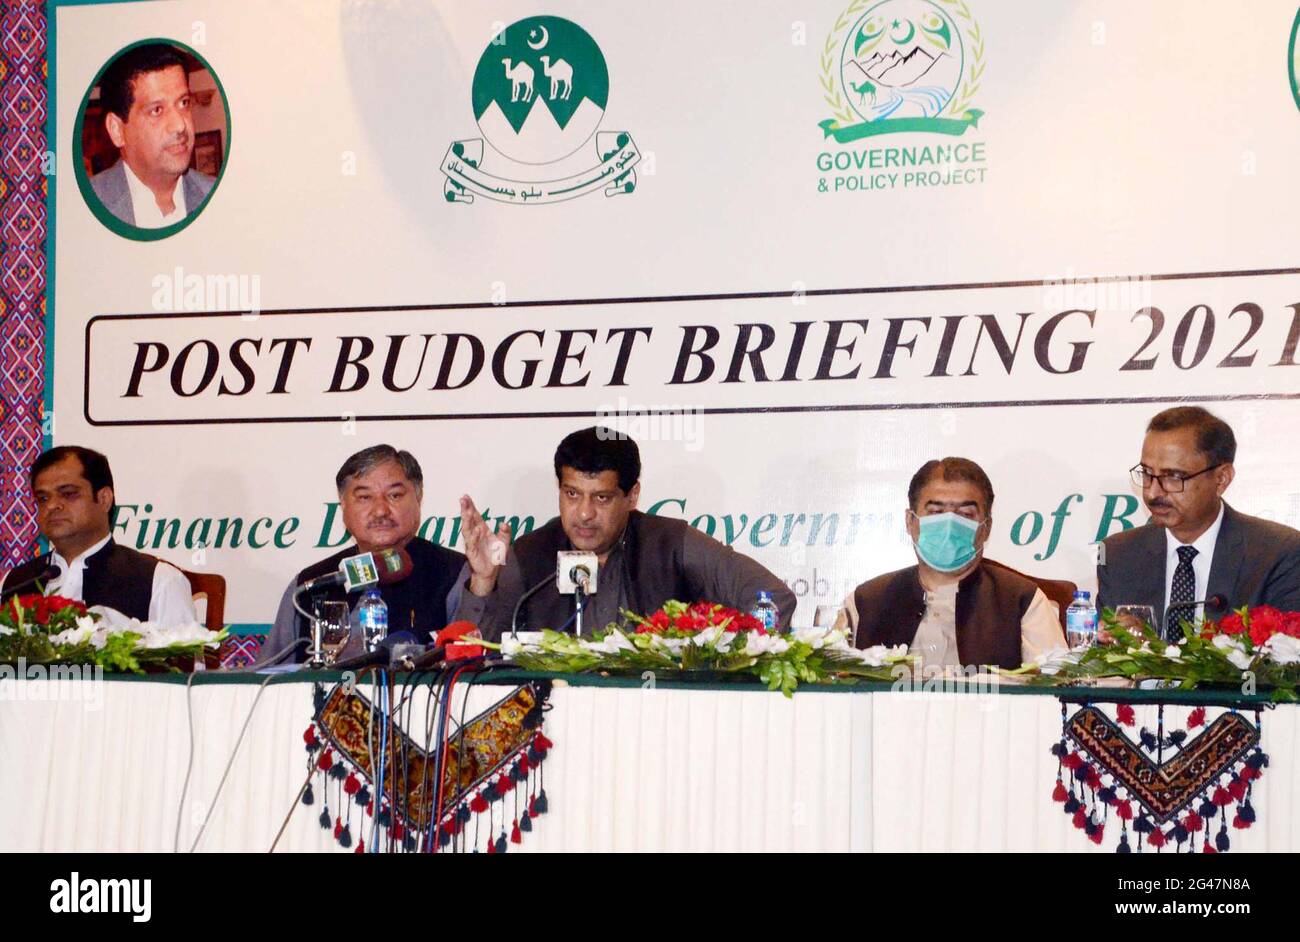 Balochistan Finance Minister, Mir Zahoor Ahmed Buledi along with others addresses to media persons during press conference regarding Post Budget  2021-22 held at Balochistan Assembly building in Quetta on Saturday, June 19, 2021. Stock Photo